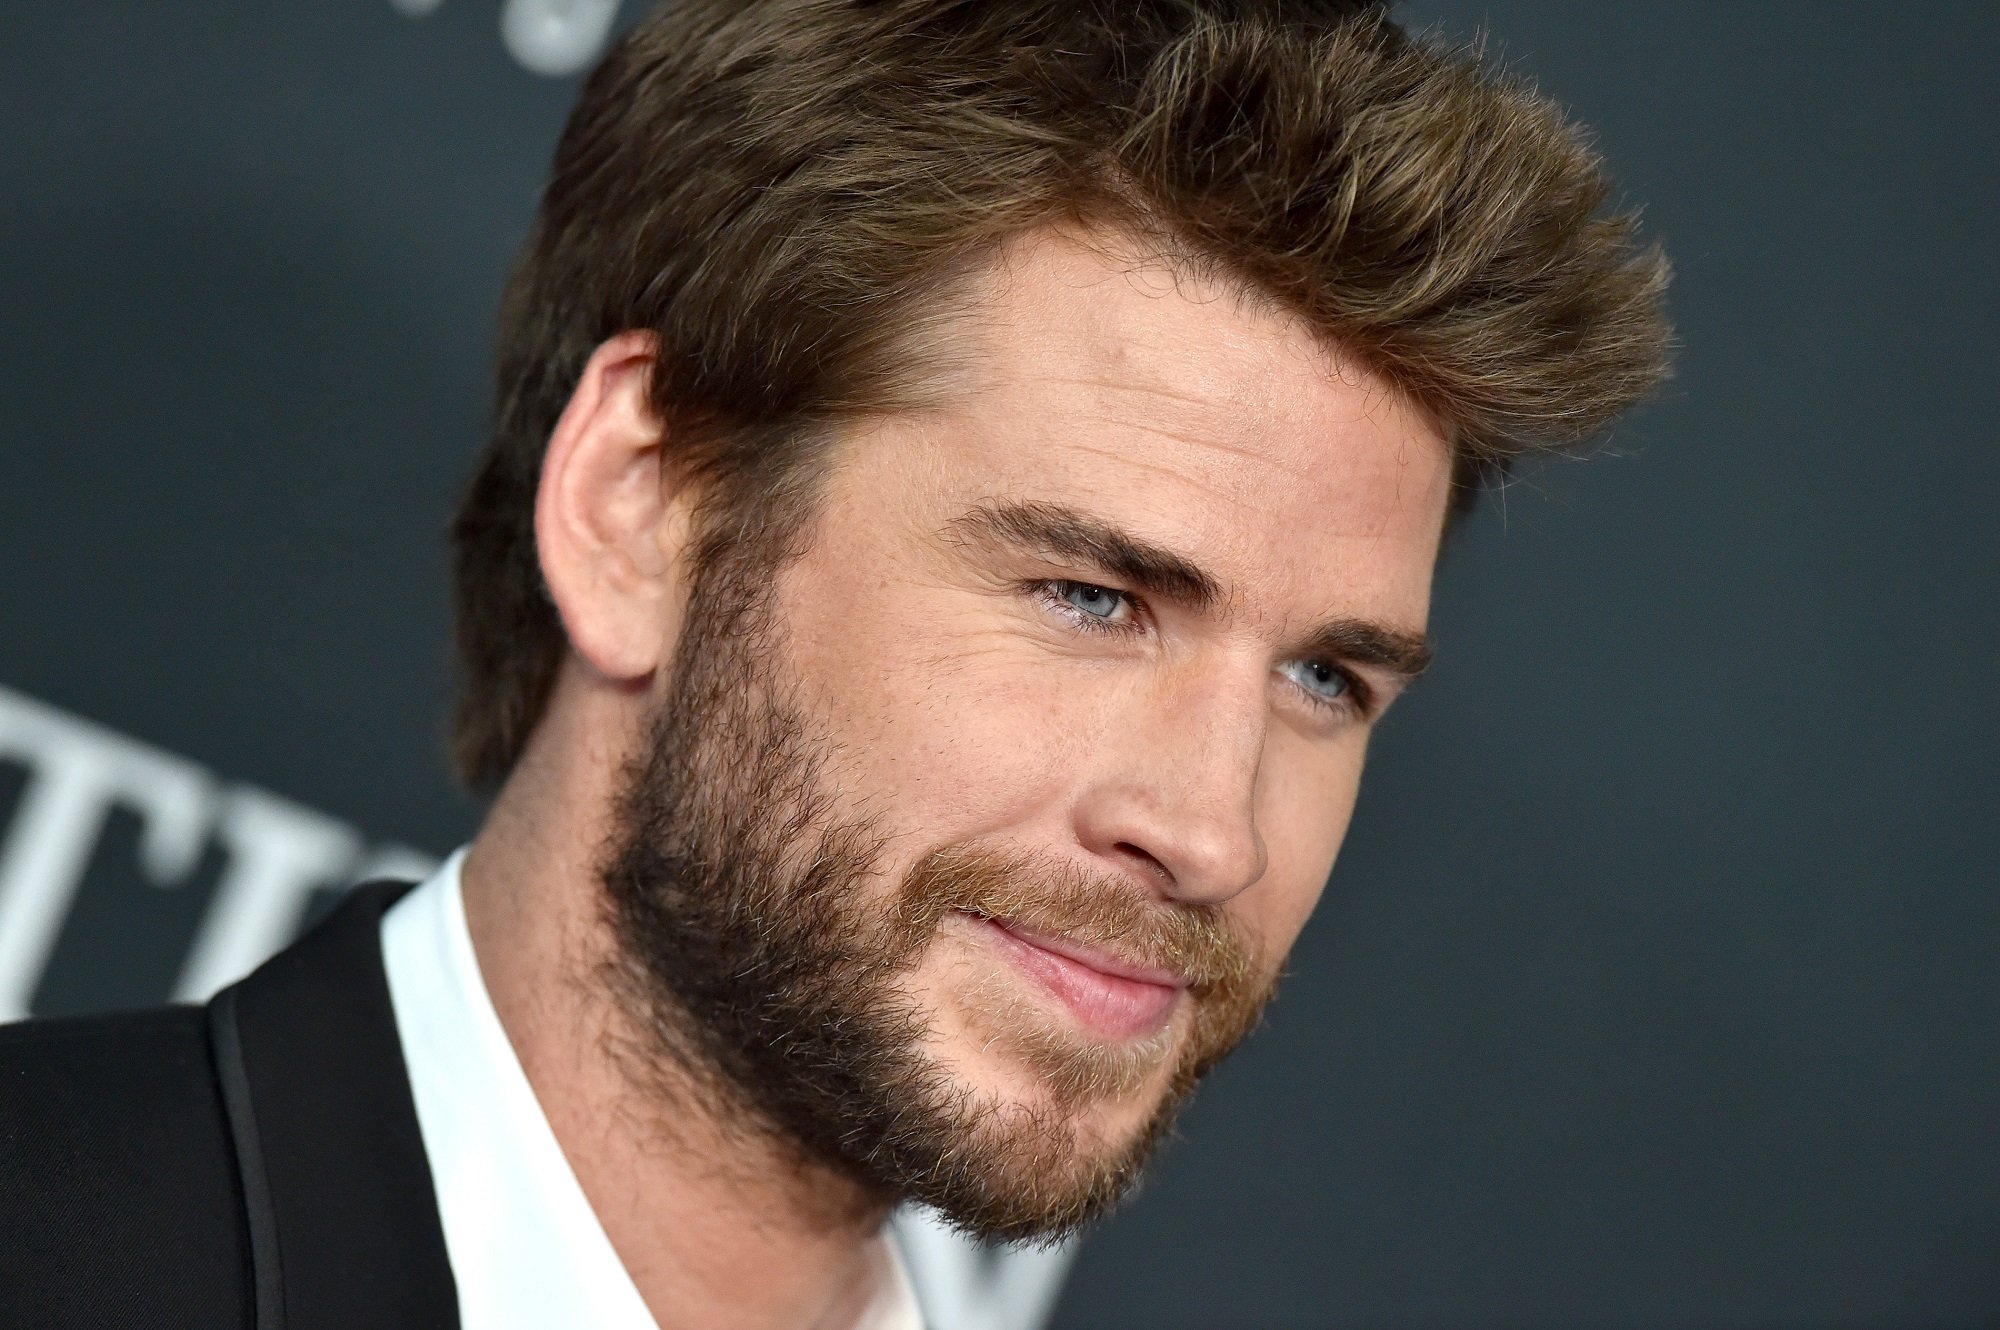 A close-up photo of actor Liam Hemsworth standing in front of a black background with white writing